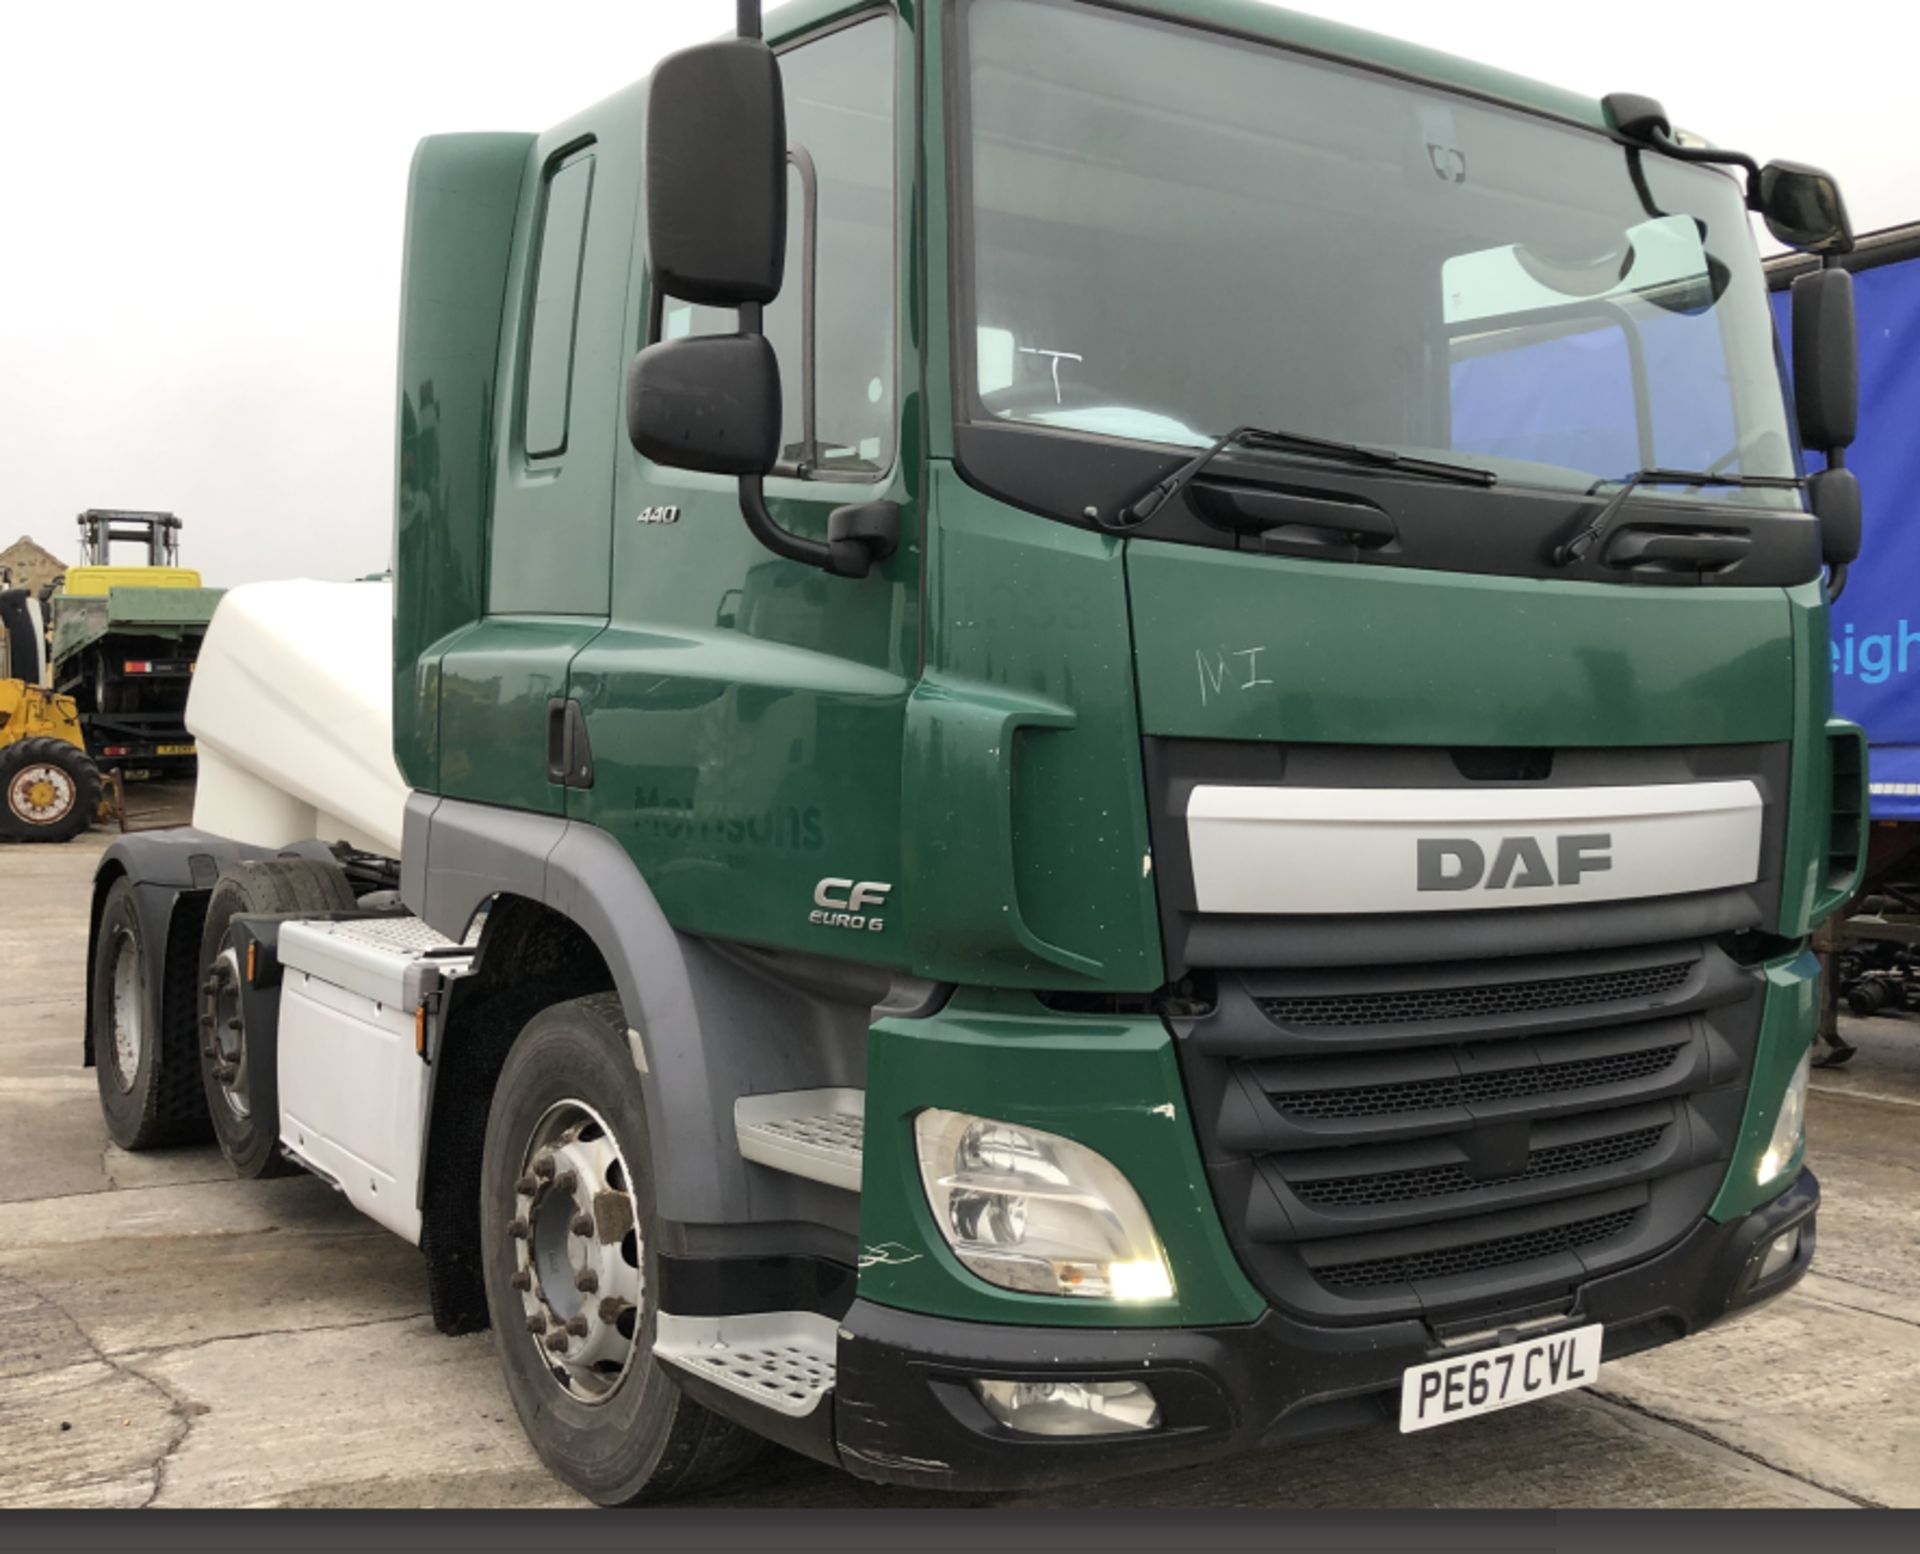 TRACTOR UNIT 2017 DAF 85 CF 6×2 - Image 3 of 10